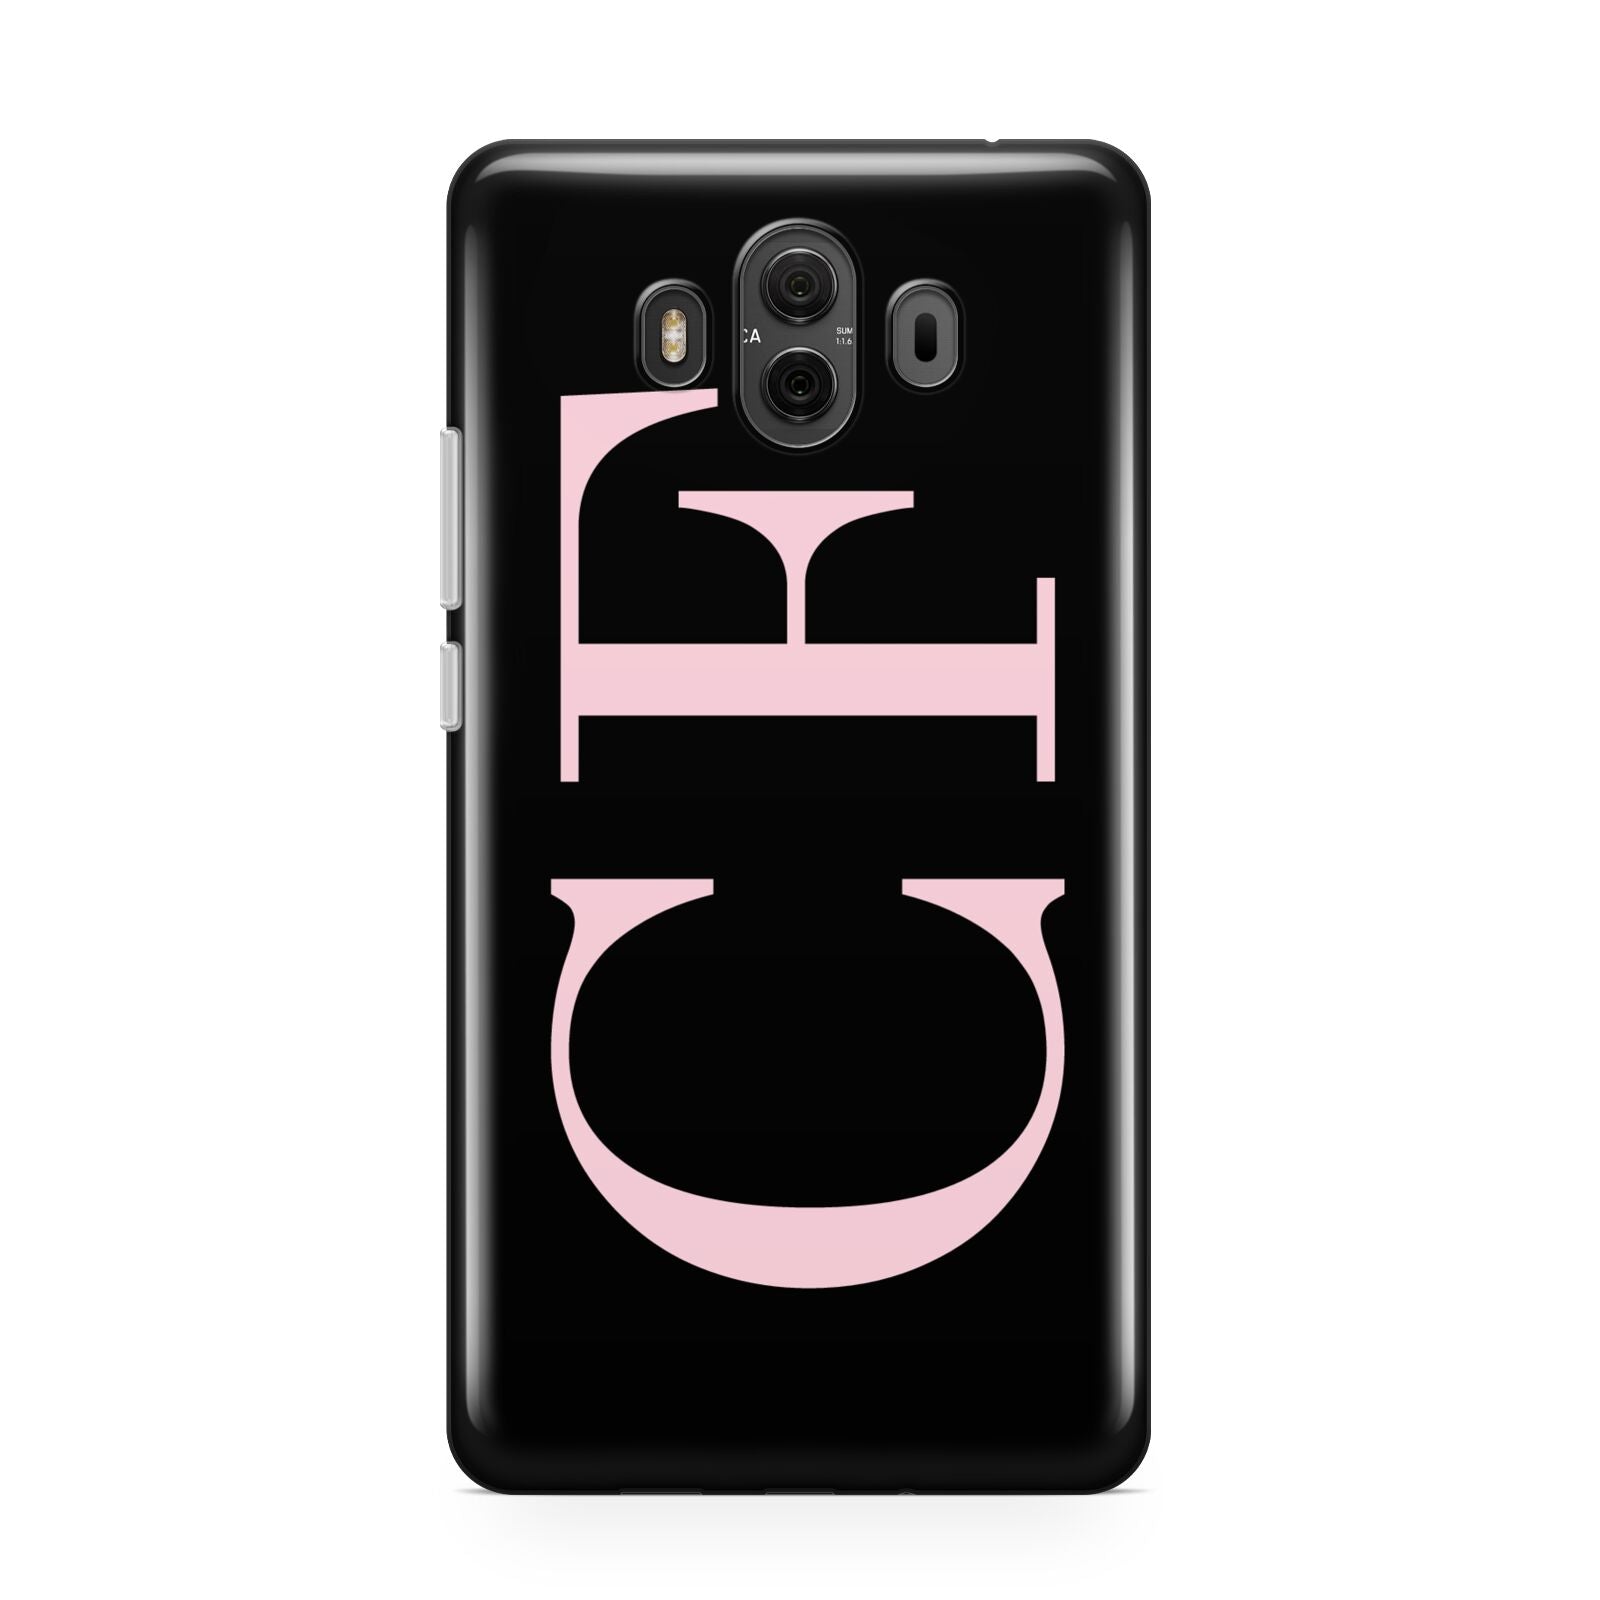 Black with Large Pink Initials Personalised Huawei Mate 10 Protective Phone Case